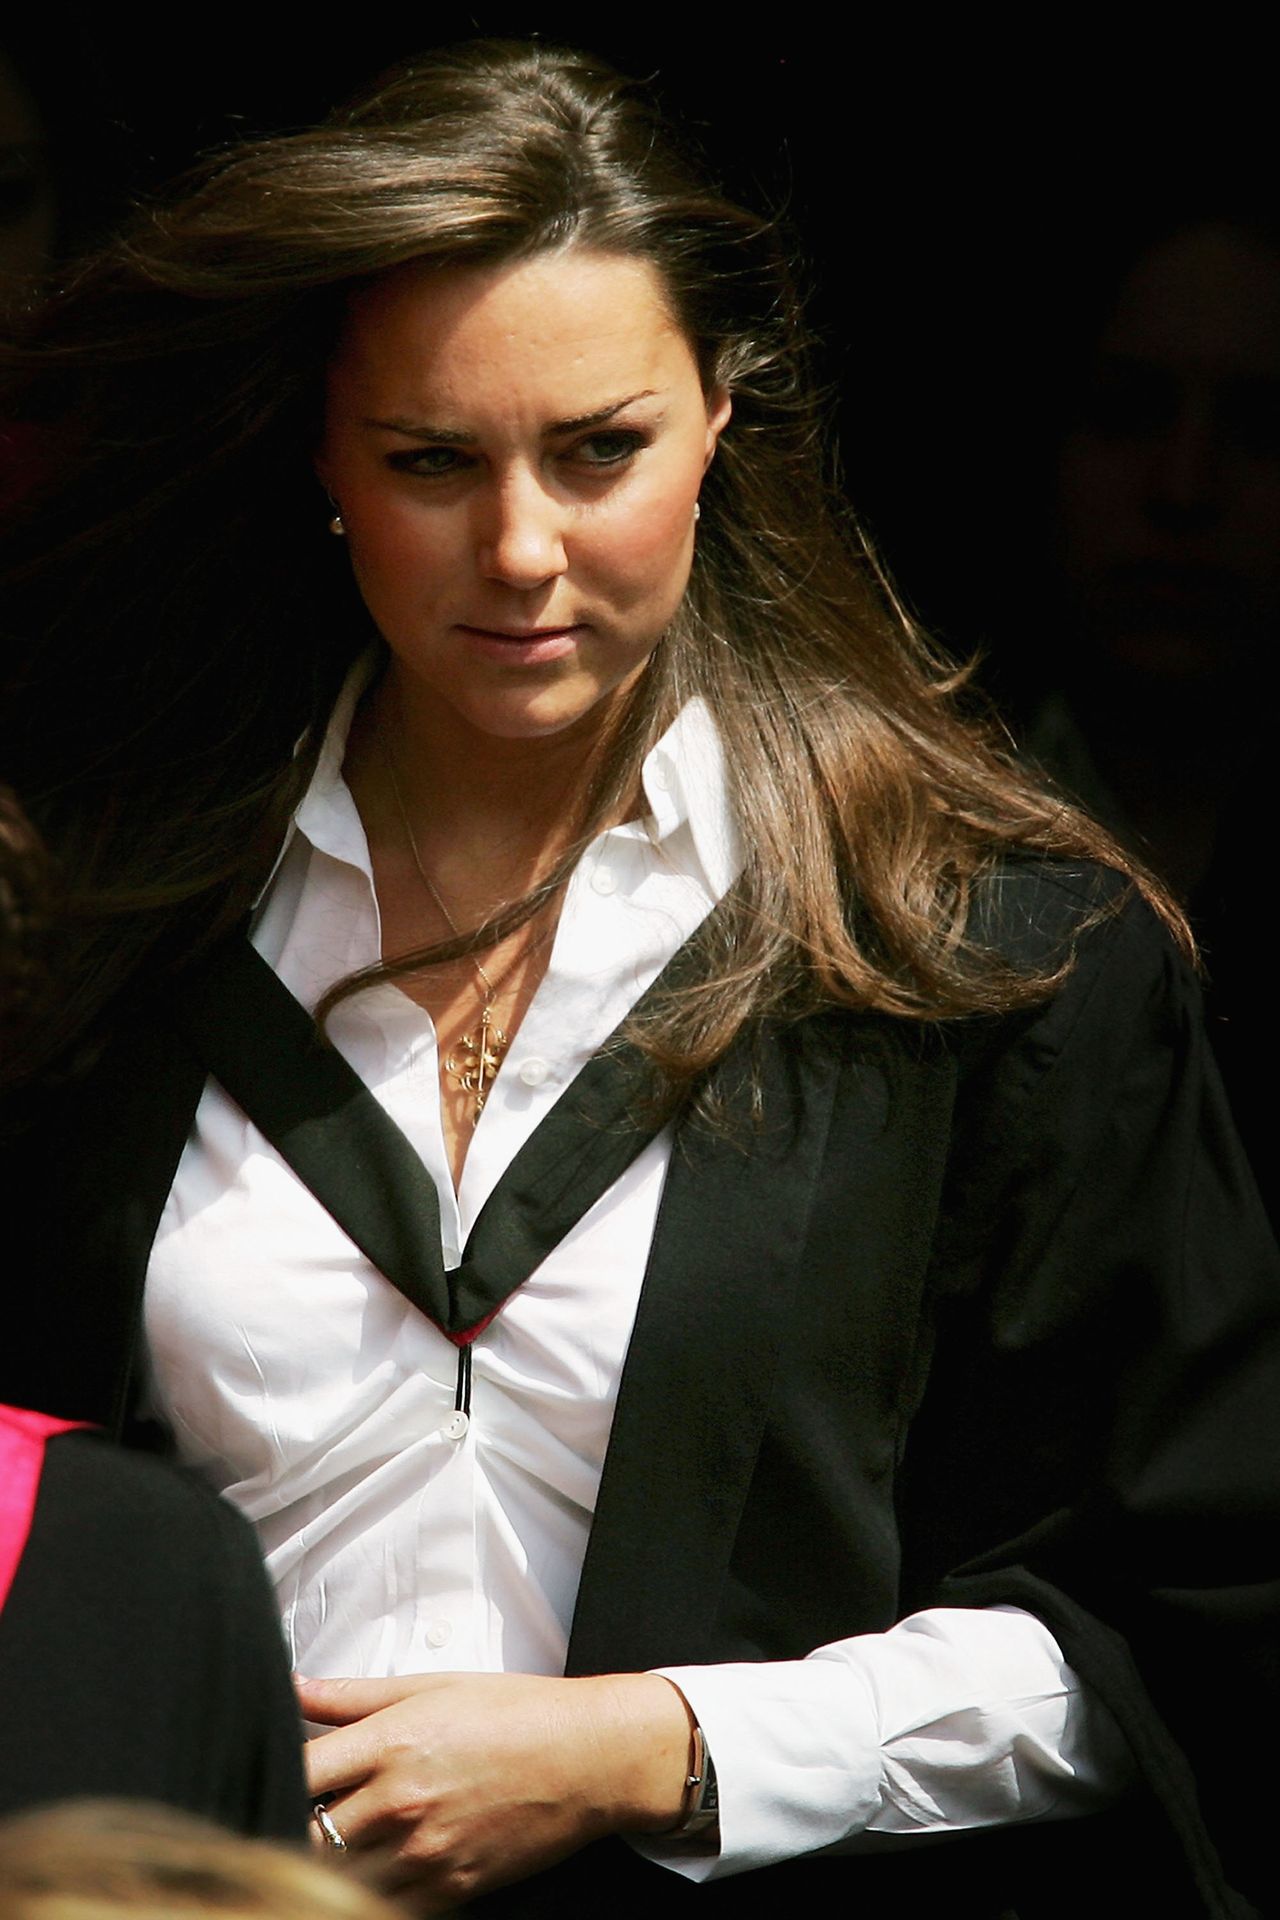 Prince William Graduates From St Andrews
ST ANDREWS, UNITED KINGDOM - JUNE 23: Kate Middleton leaves Younger Hall after her graduation ceremony, June 23, 2005 in St Andrews, Scotland. The Prince, who earned a 2:1 class Ma in Geography, will lose the special protection set up to prevent the media from trailing him while he was in full-time education. William will be conducting his first solo official engagements in New Zealand over the next few months which will include ceremonies marking the anniversary of the end of World War II. (Photo by Bruno Vincent/Getty Images)
Bruno Vincent
EOS1DMkII-207135 education royalty royals diana 53053338